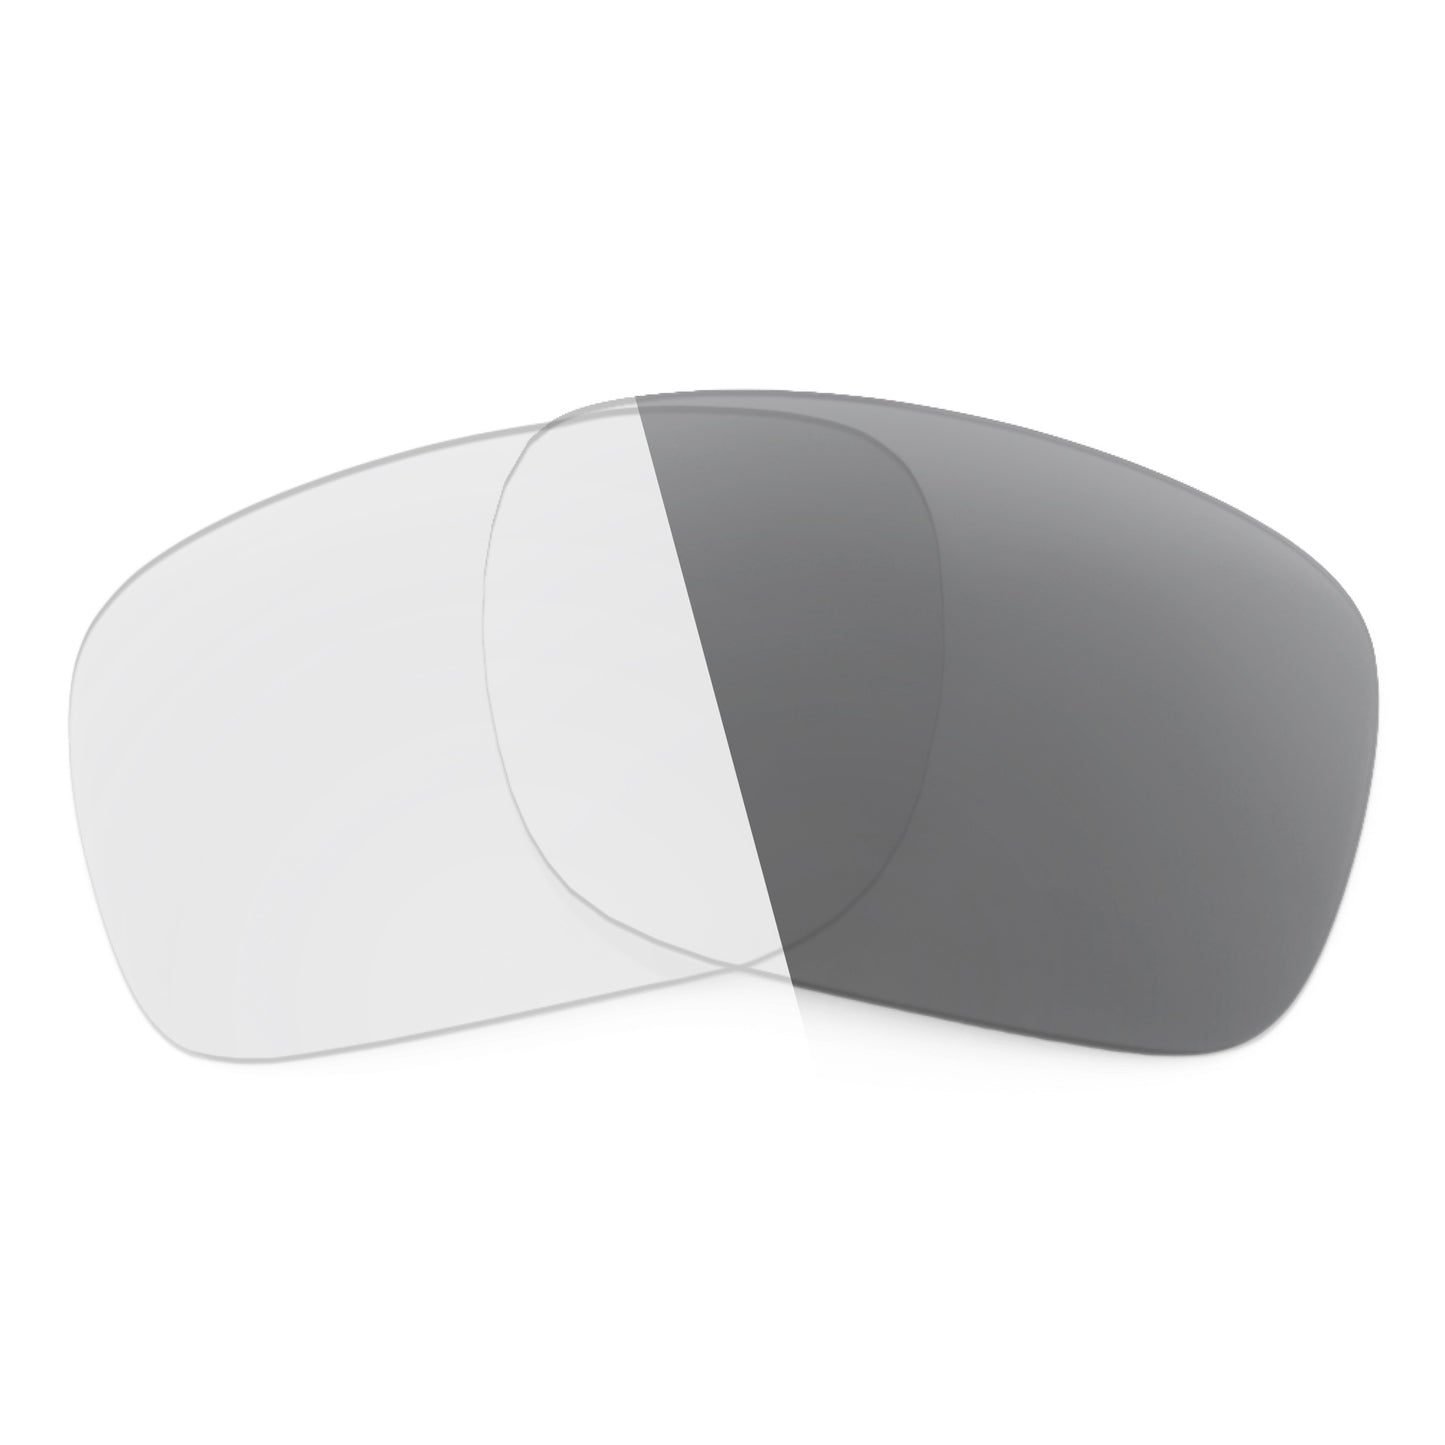 Revant replacement lenses for Ray-Ban RB8062 Titanium 51mm Non-Polarized Adapt Gray Photochromic